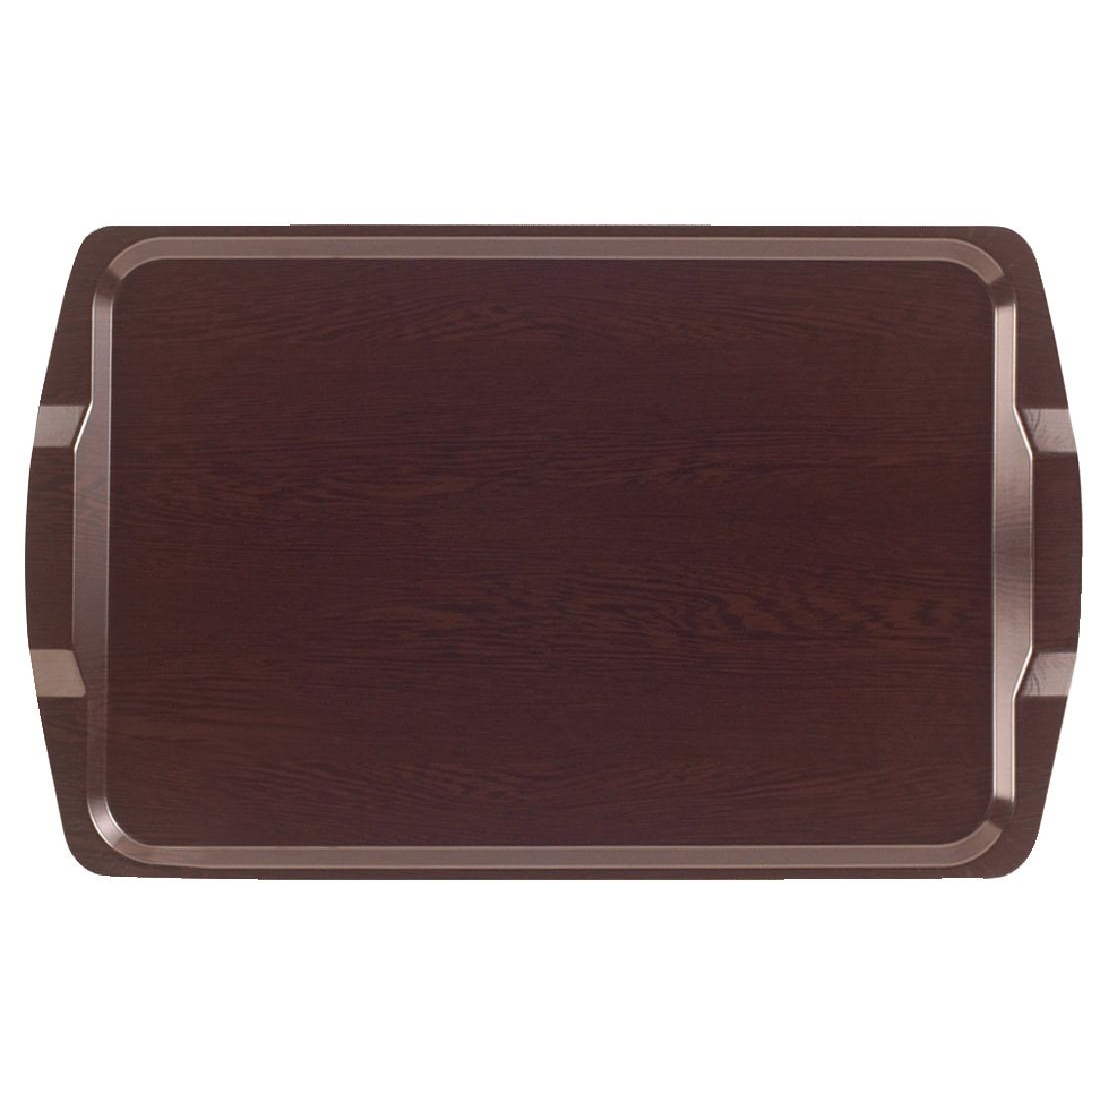 Room Service Tray With Venge Handles